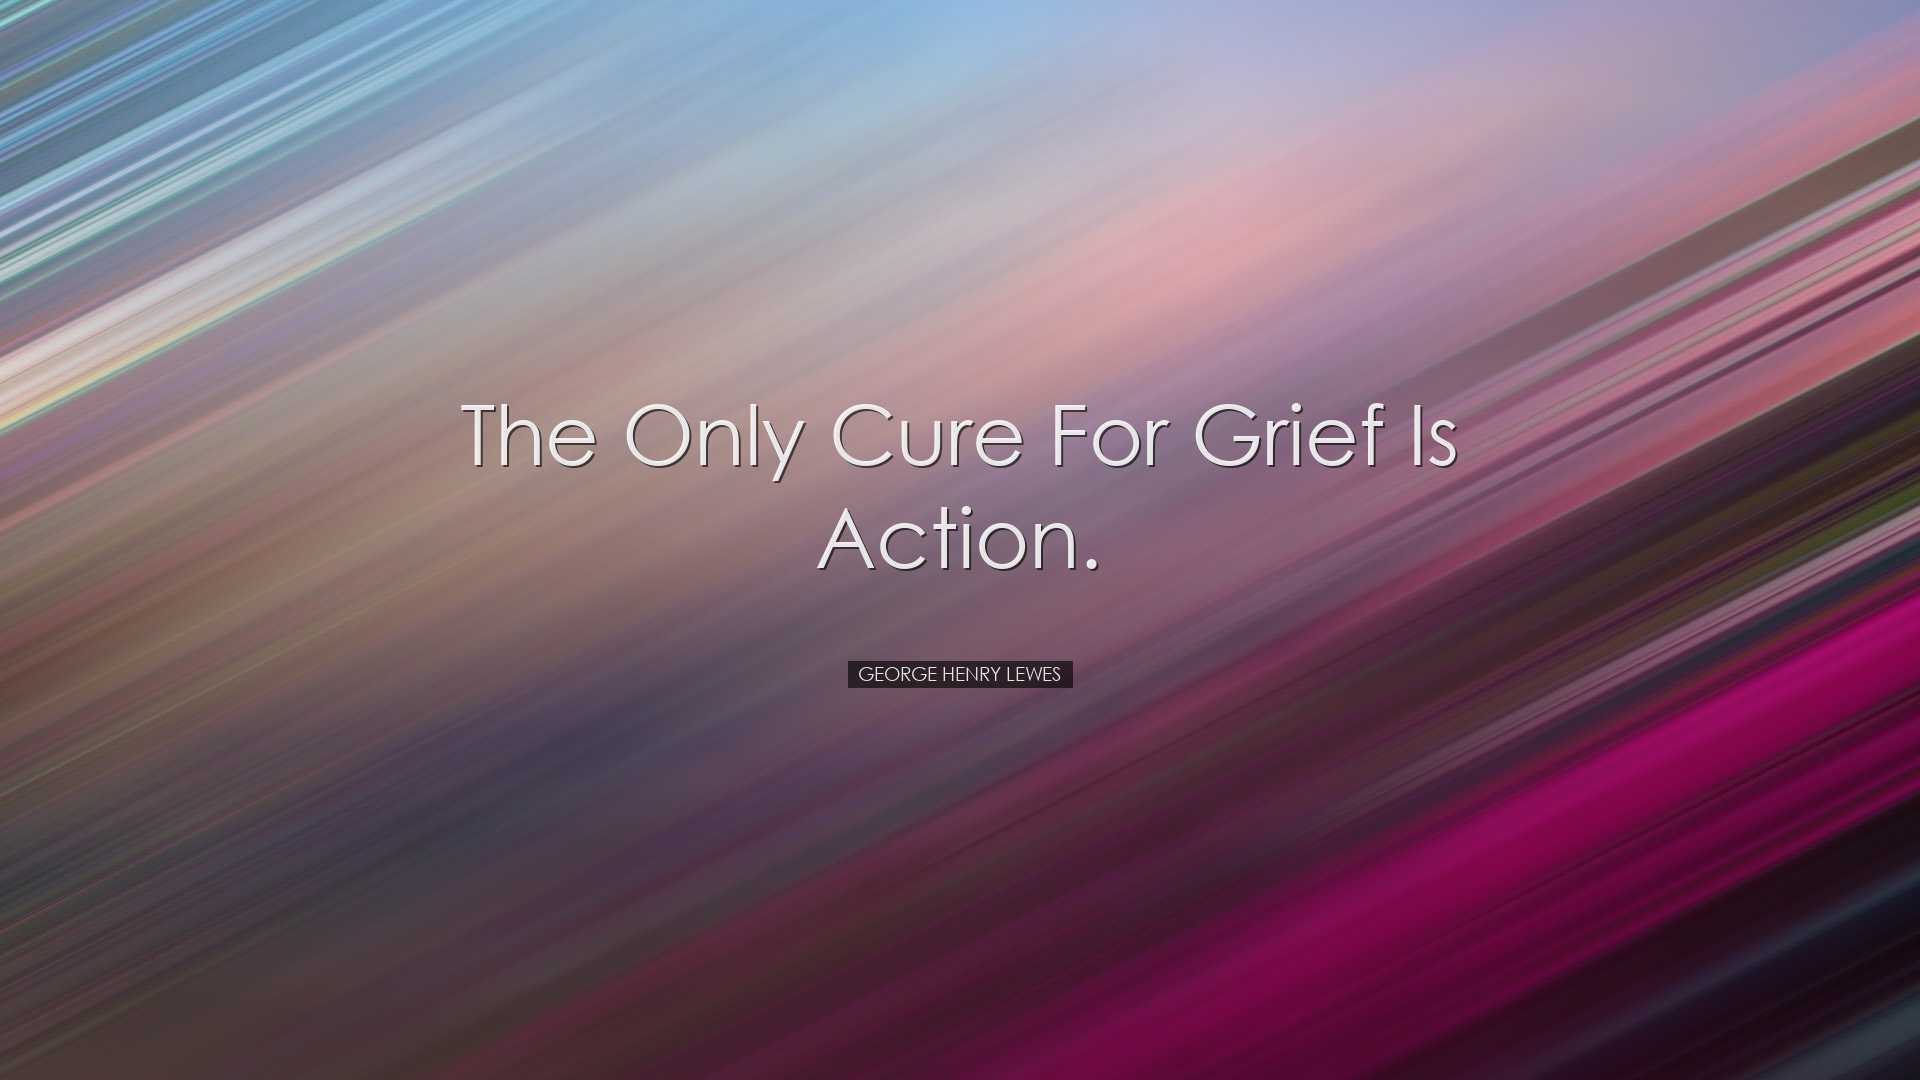 The only cure for grief is action. - George Henry Lewes